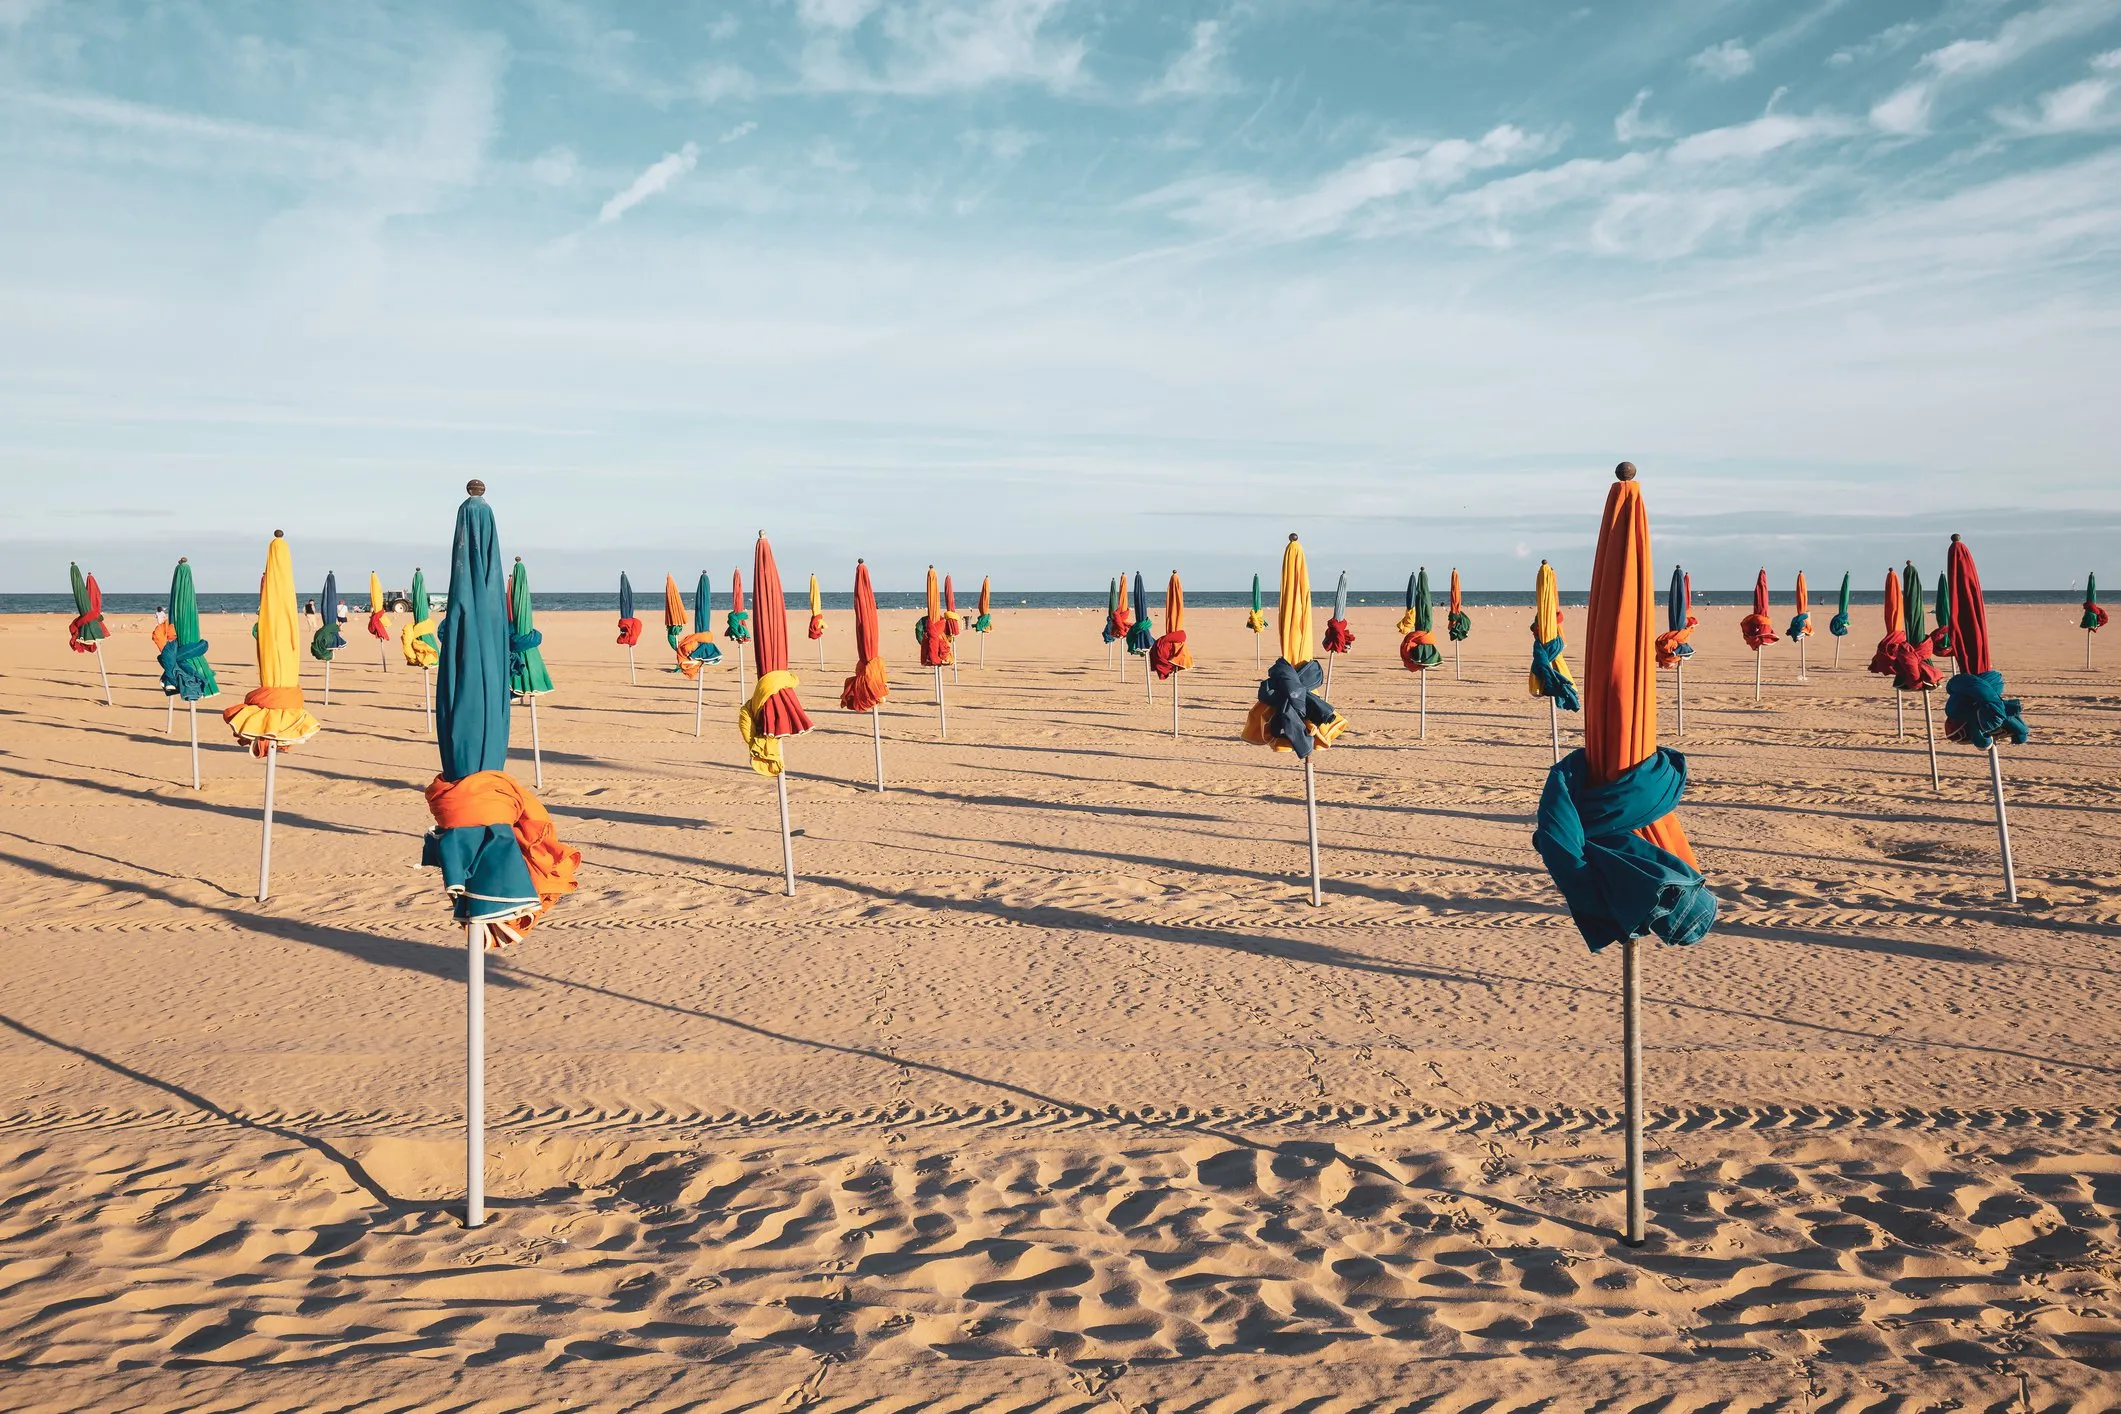 Deauville Beach in France, Europe | Beaches - Rated 5